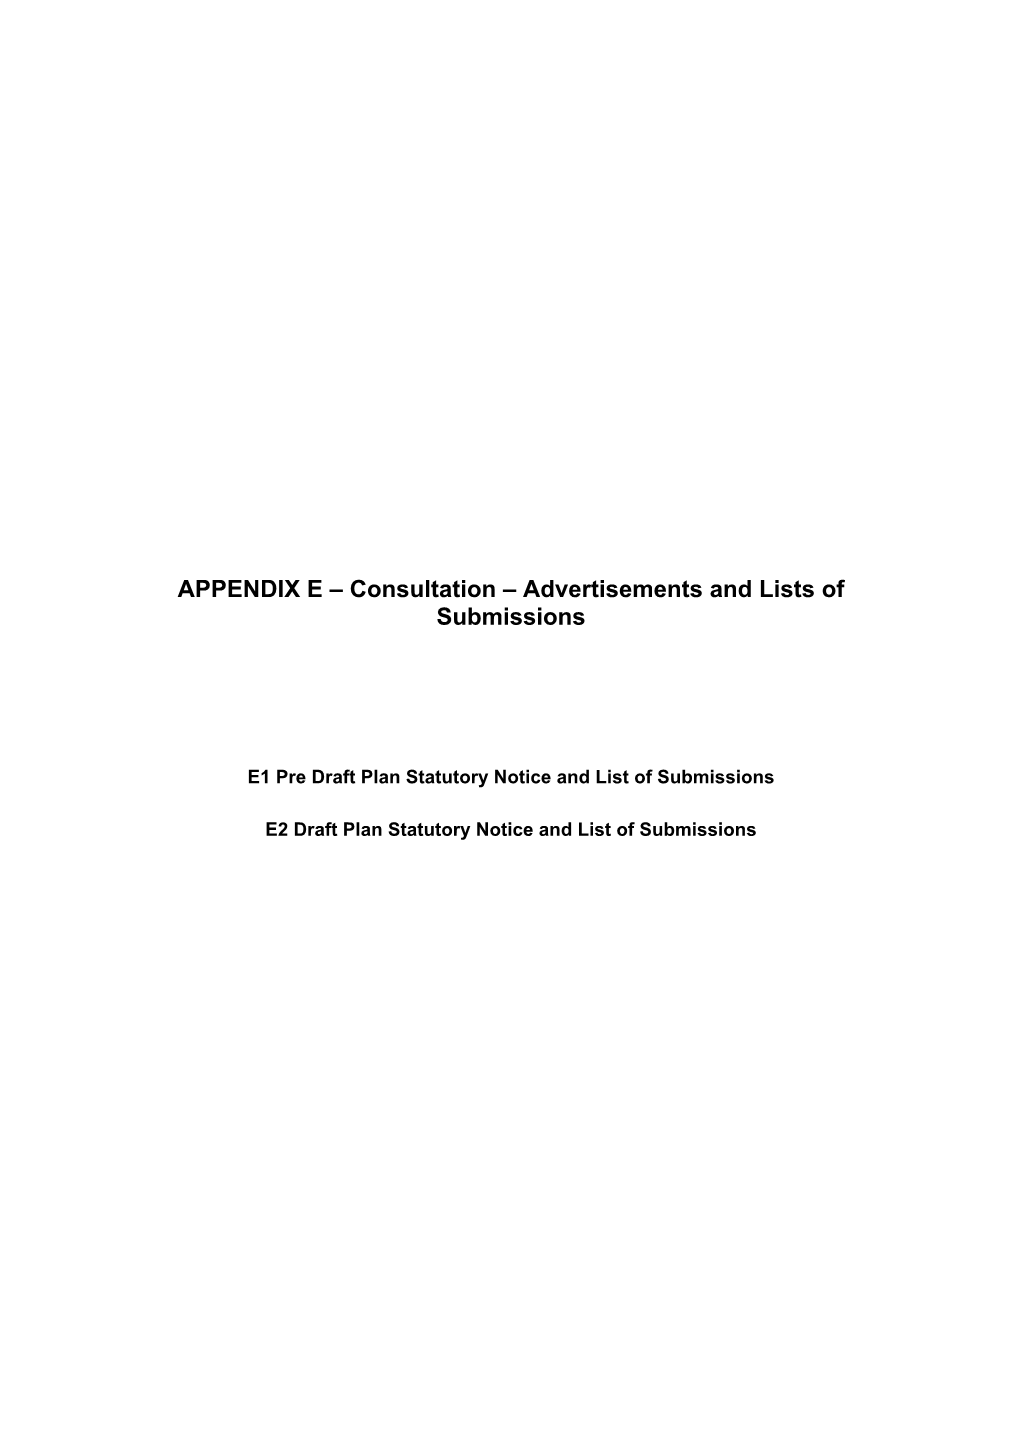 APPENDIX E – Consultation – Advertisements and Lists of Submissions